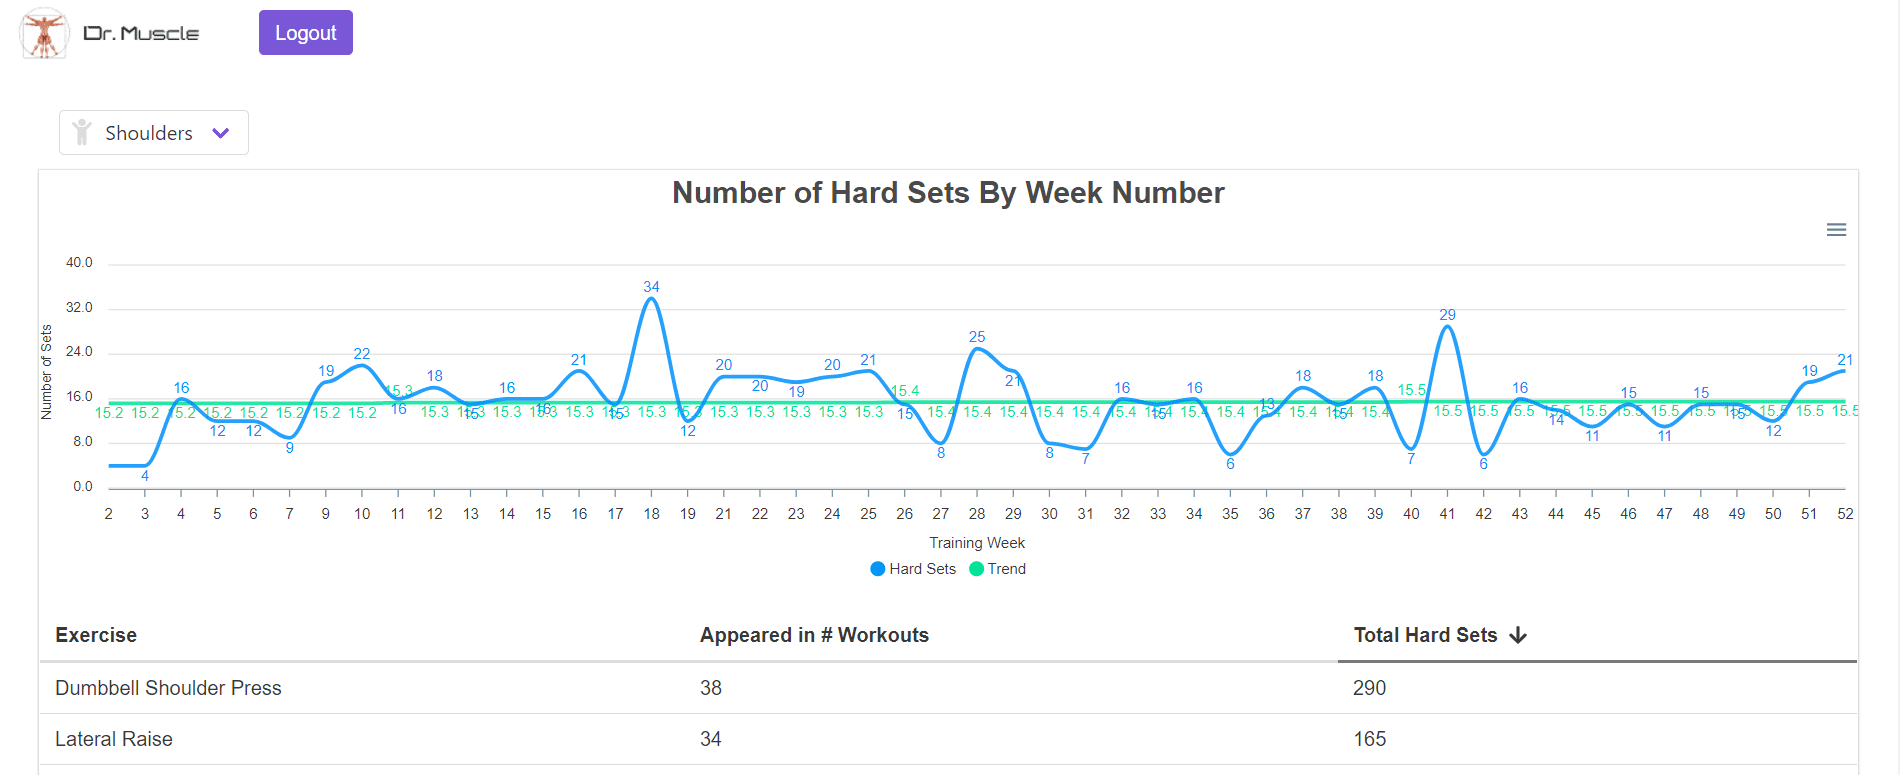 Mesocycle Progression in Hypertrophy: Number of hard sets by week for shoulders in my dashboard over the last year